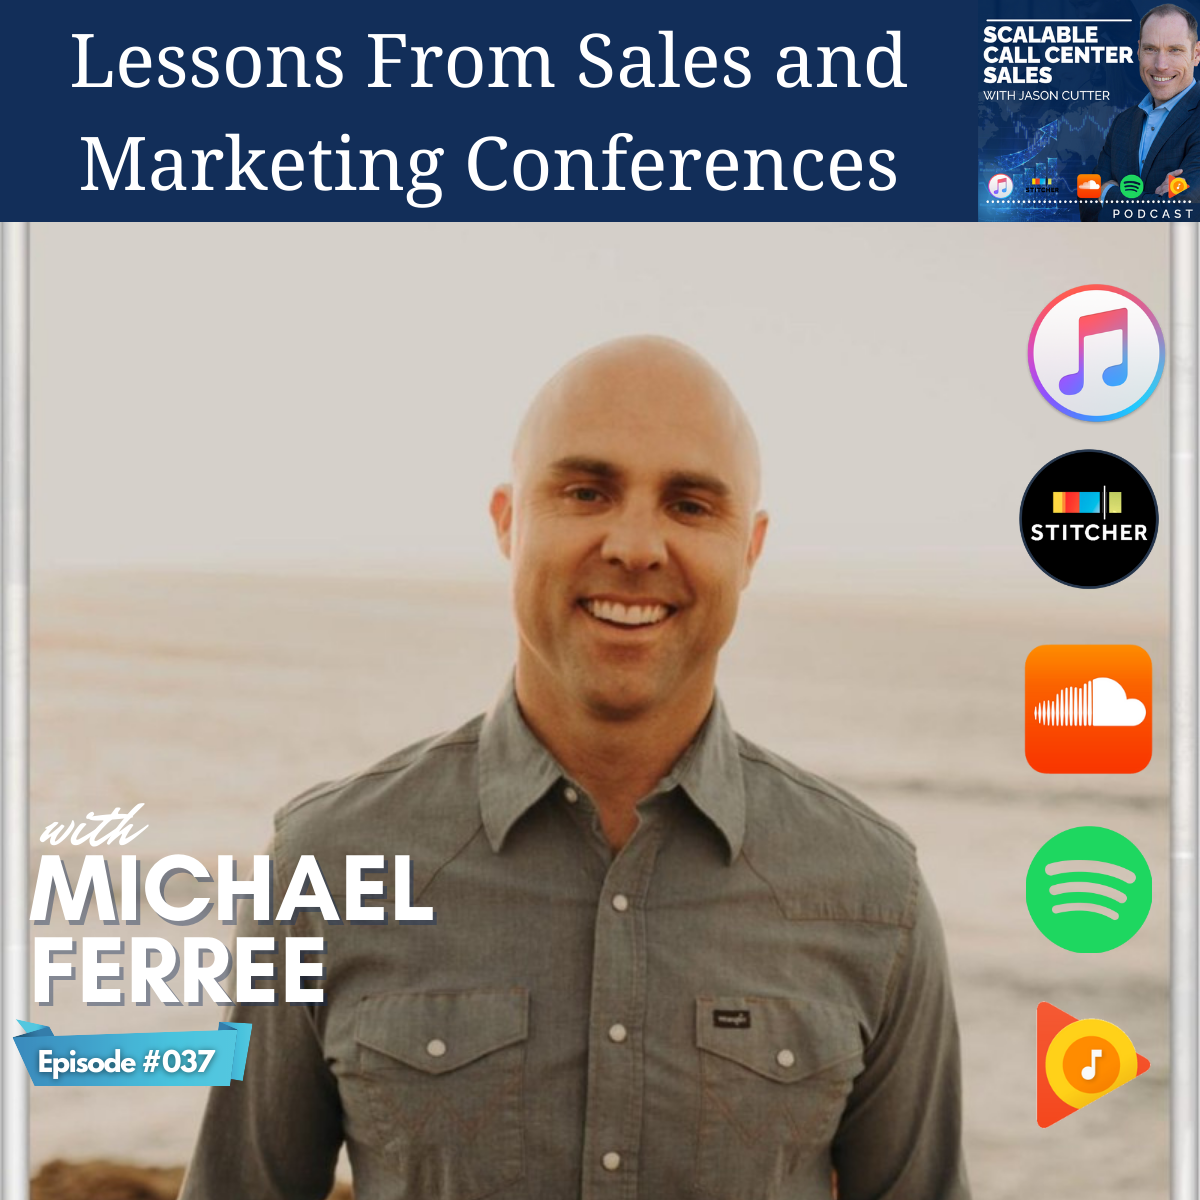 [037] Lessons From Sales and Marketing Conferences, with Michael Ferree from Lead Generation World